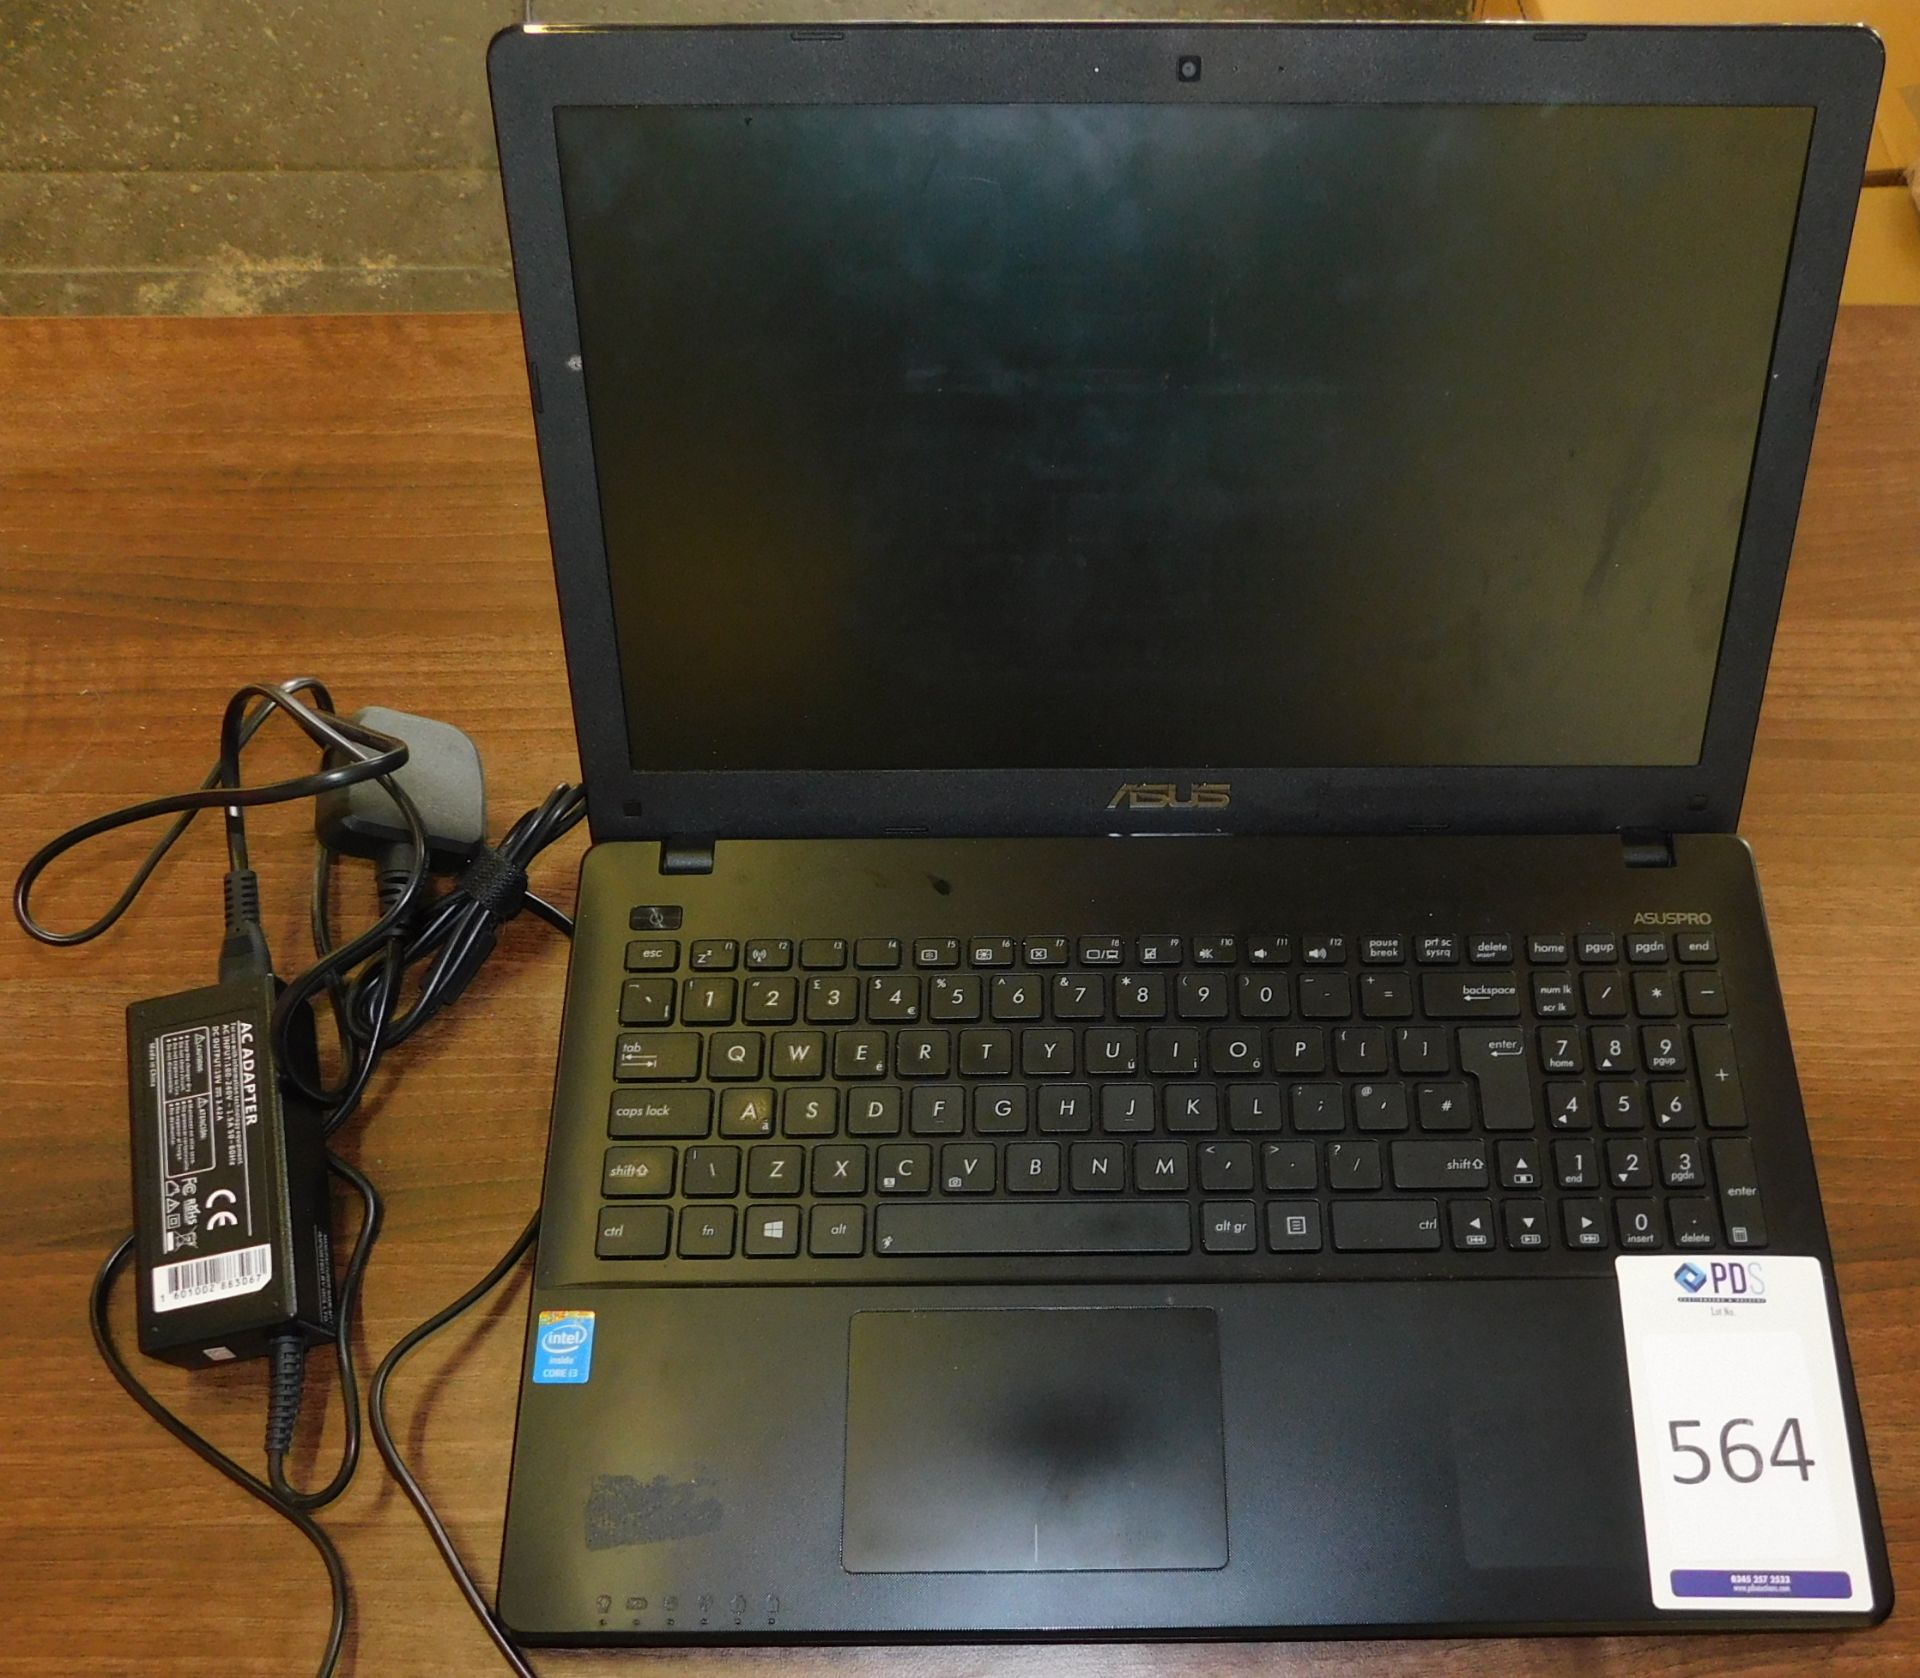 ASUS Pro P550L i3 Laptop with Power Cable (No HDD) (Located Stockport - See General Notes for More